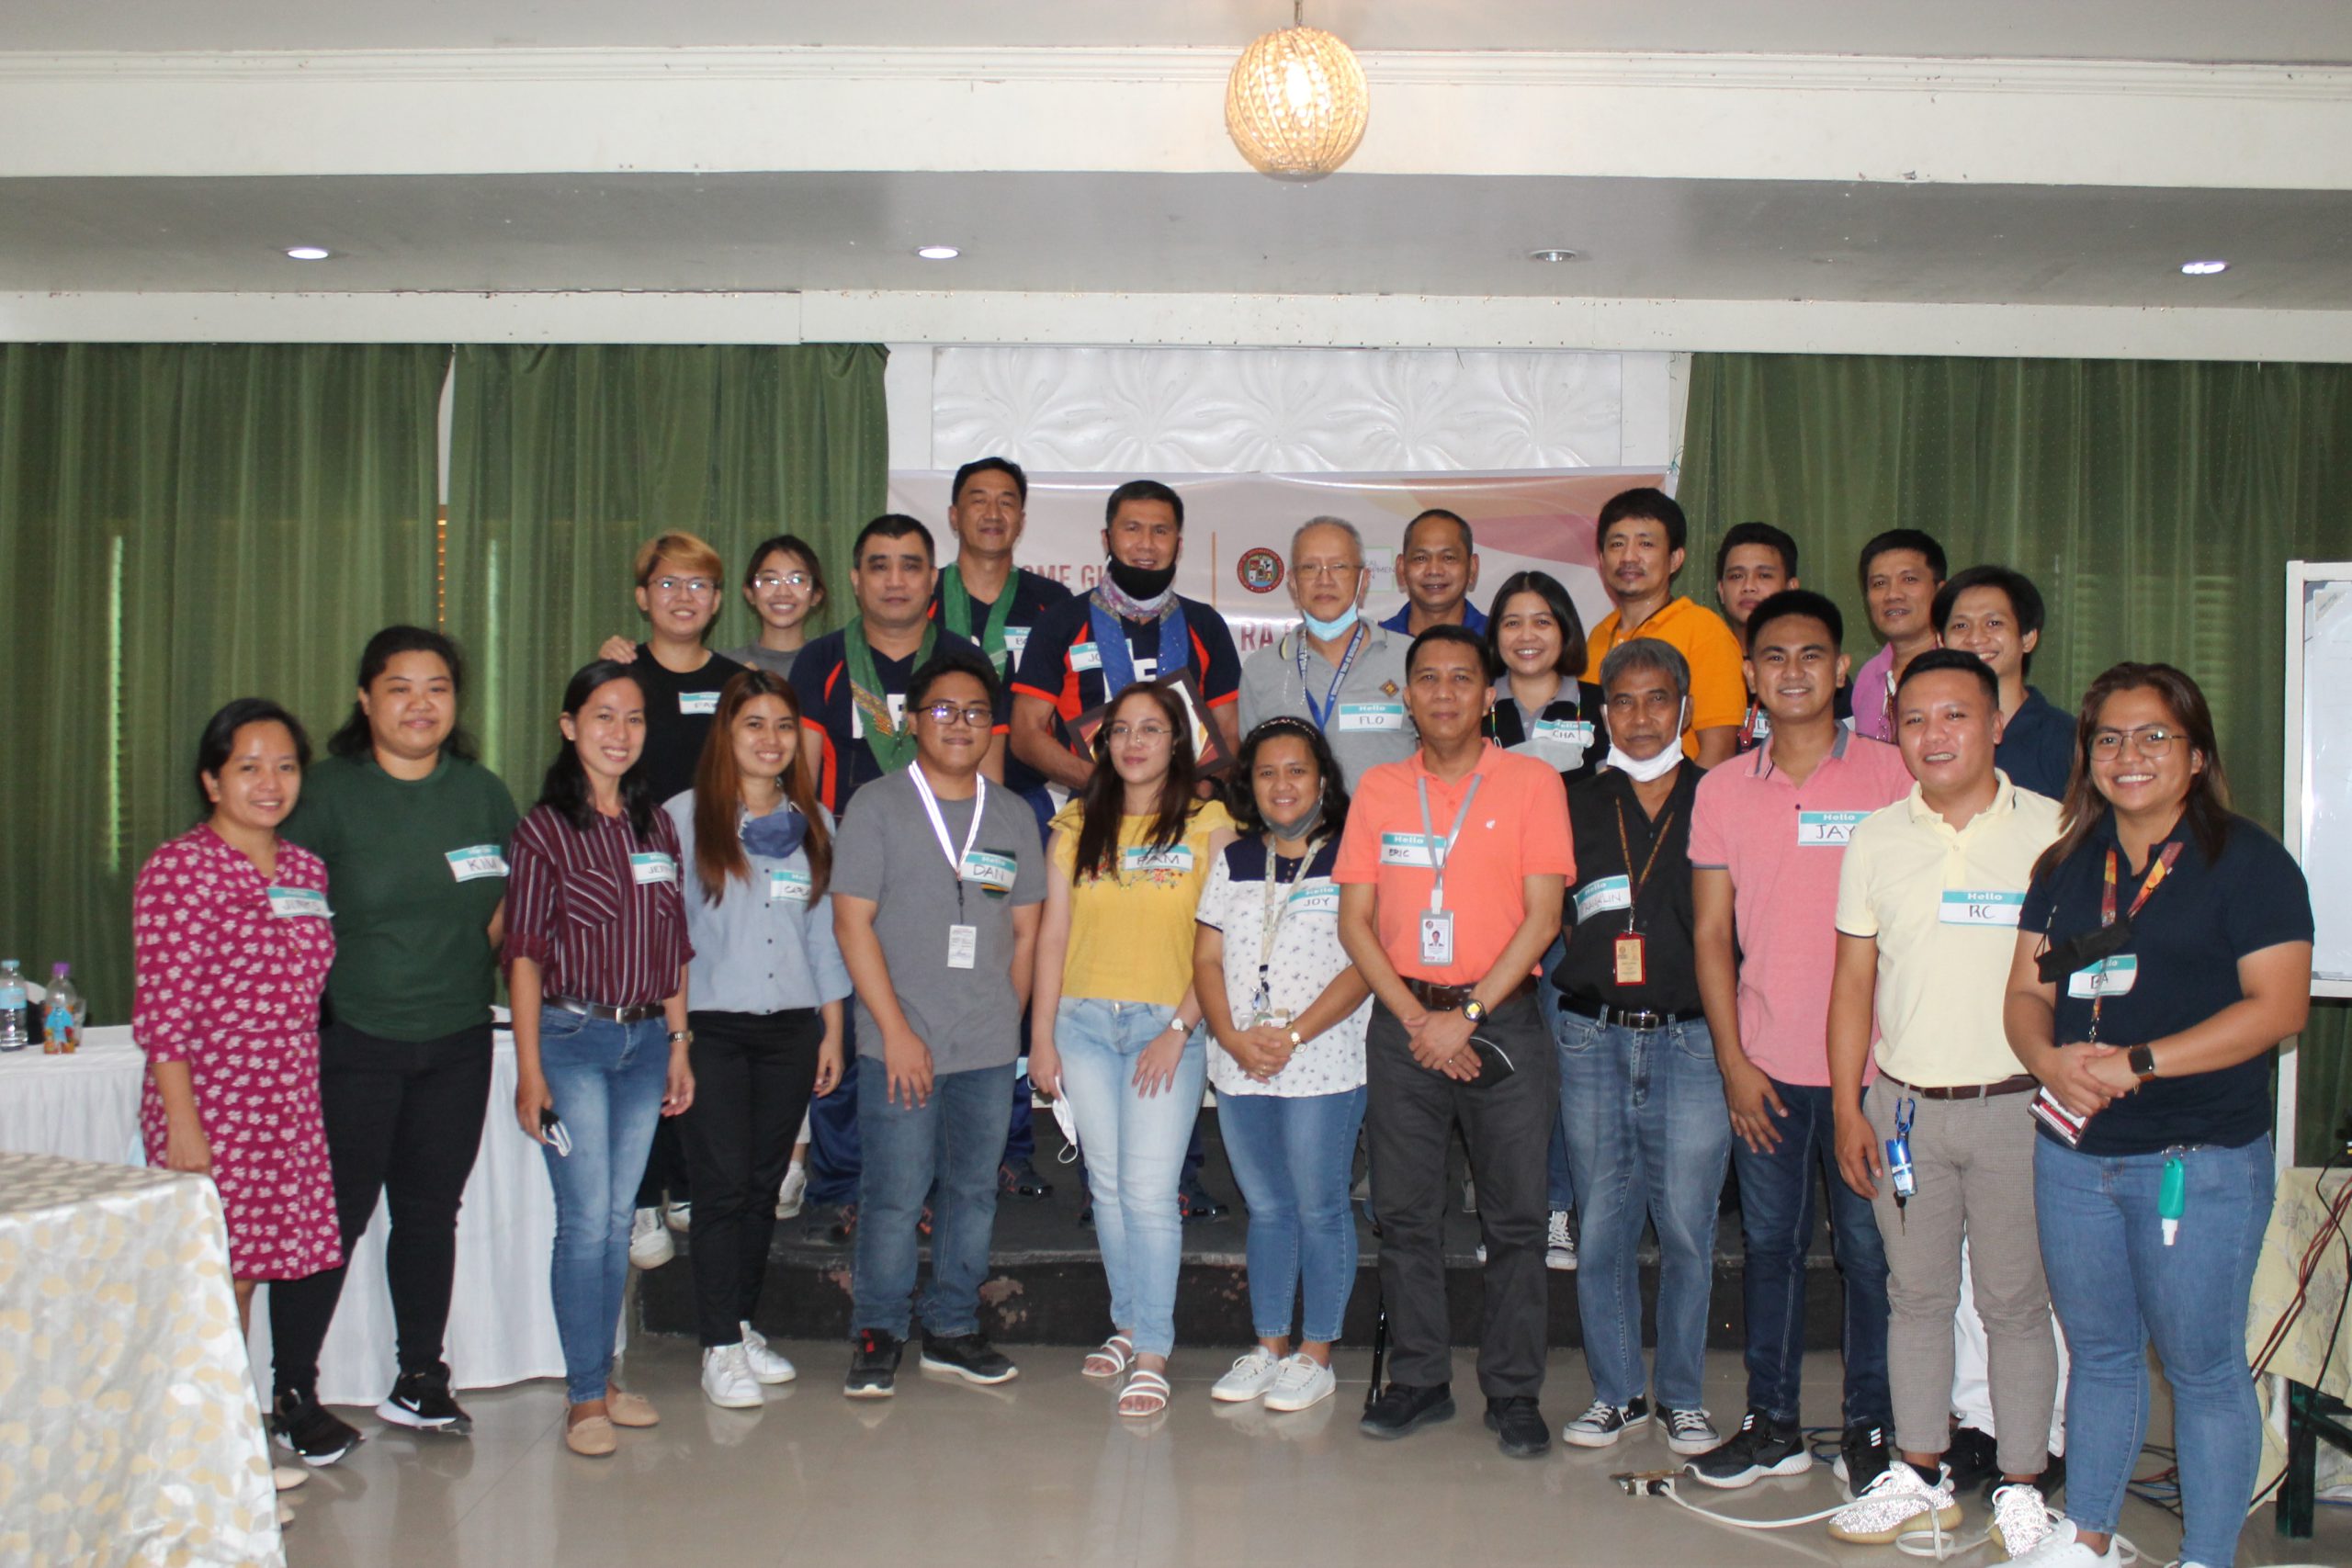 Physical Development Division – Held it’s 2022 Mid-year Conference on June 2 & 3 at the Davao Eagle Ridge Resort and was attended by their invited guest from the Bureau of Fire Protection Officials to give an Orientation on RA 9514 Fire Code of the Philippines.